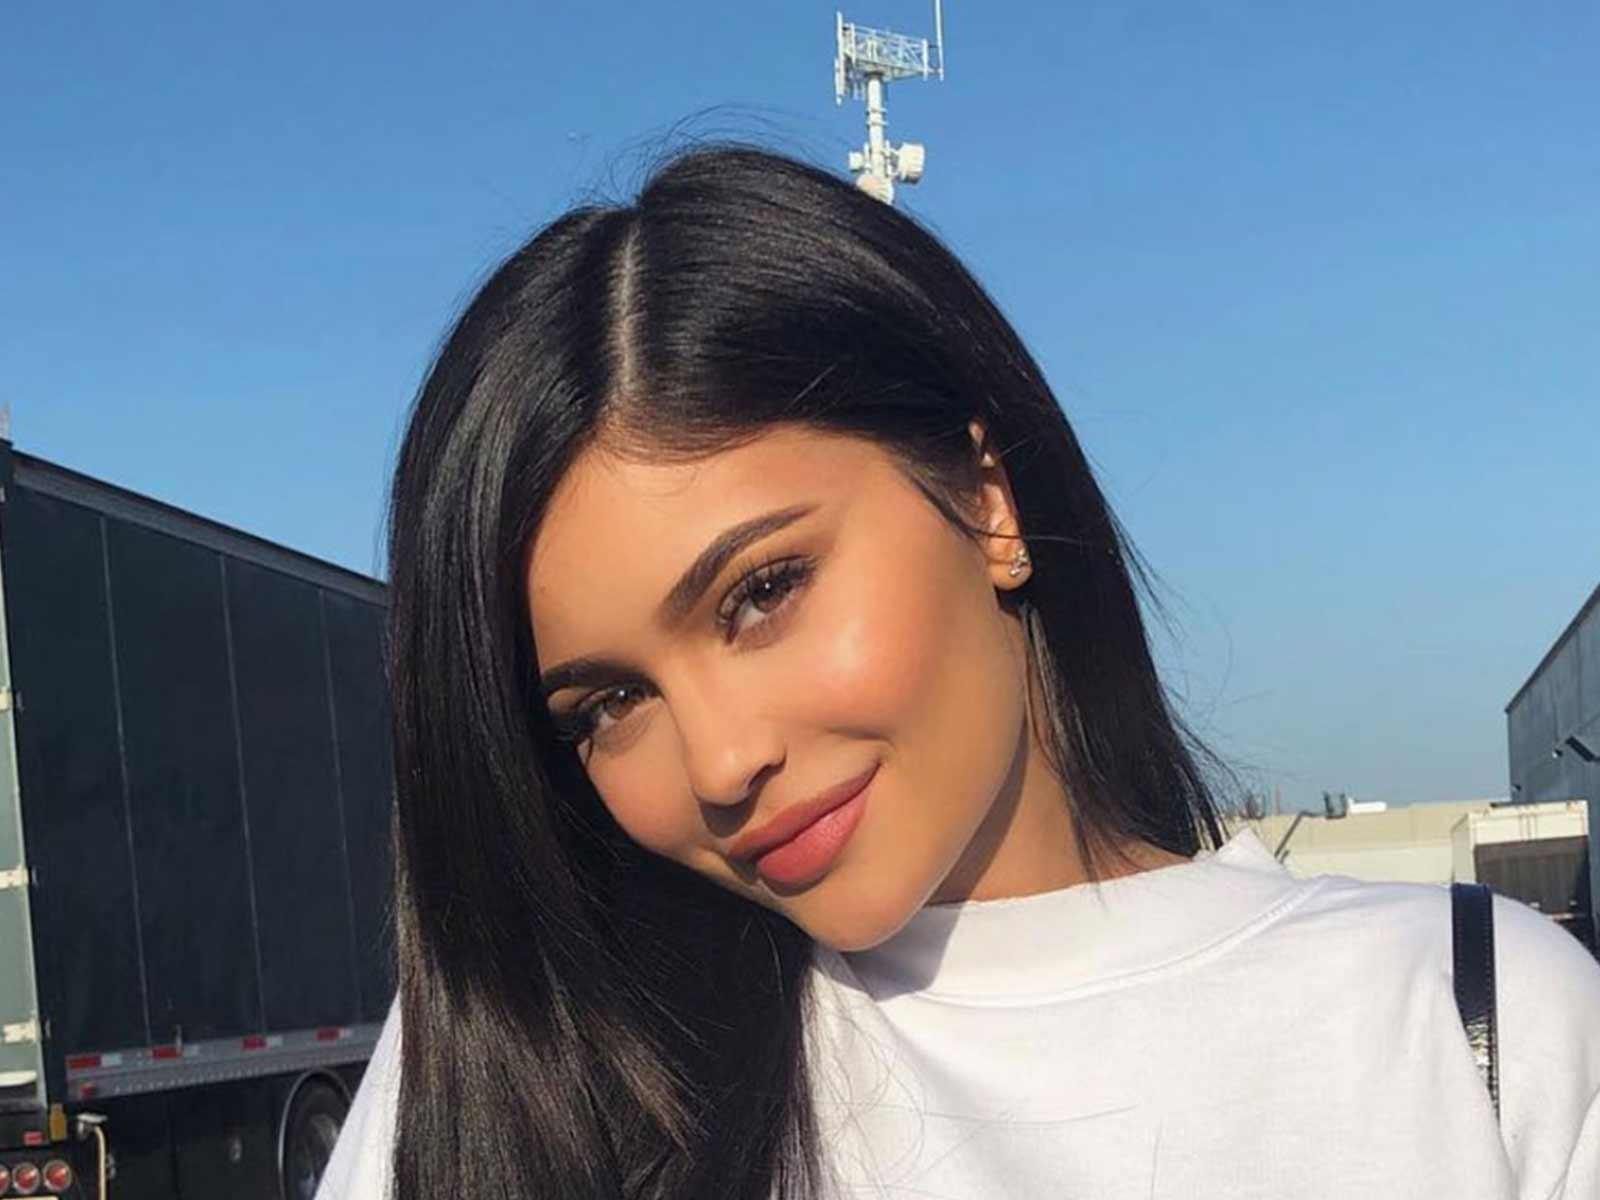 Kylie Jenner Shows How a 20-Year-Old Body Snaps Back After Child Birth